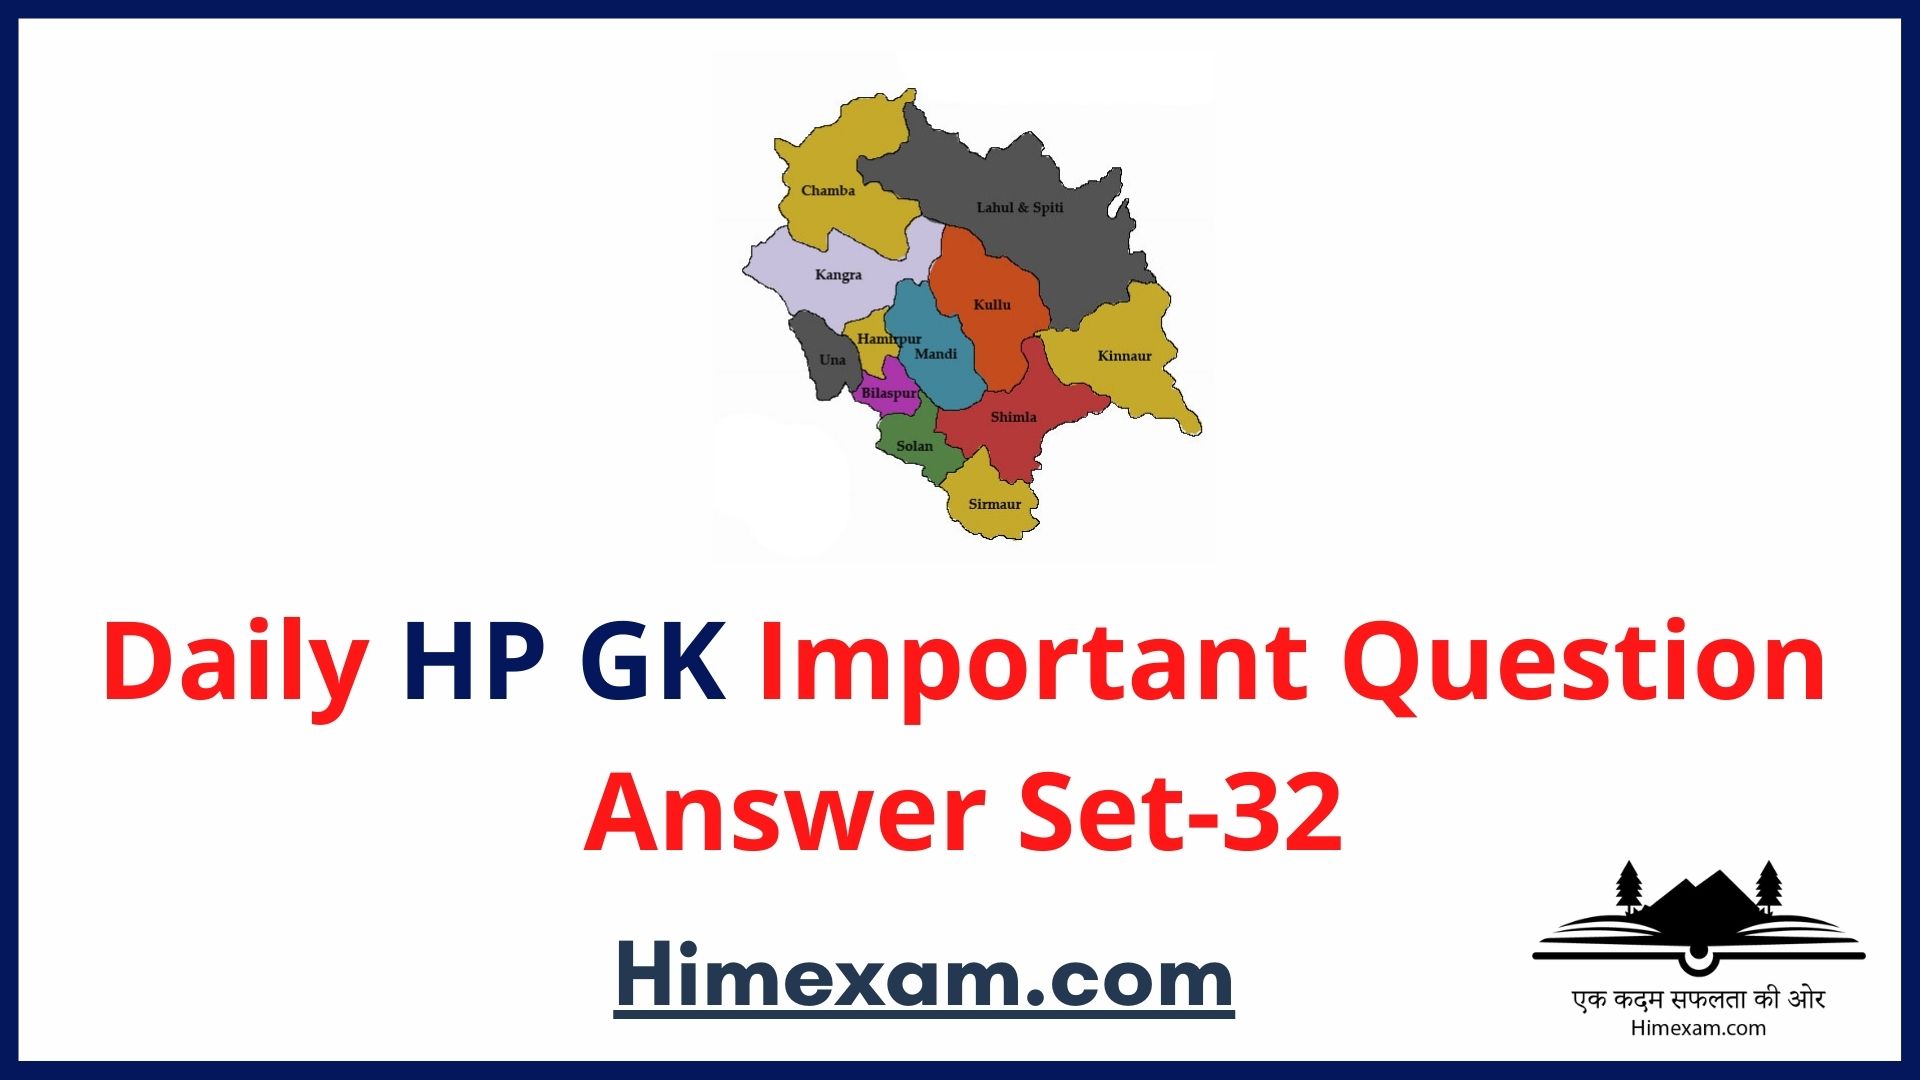 Daily HP GK Important Question Answer Set-32